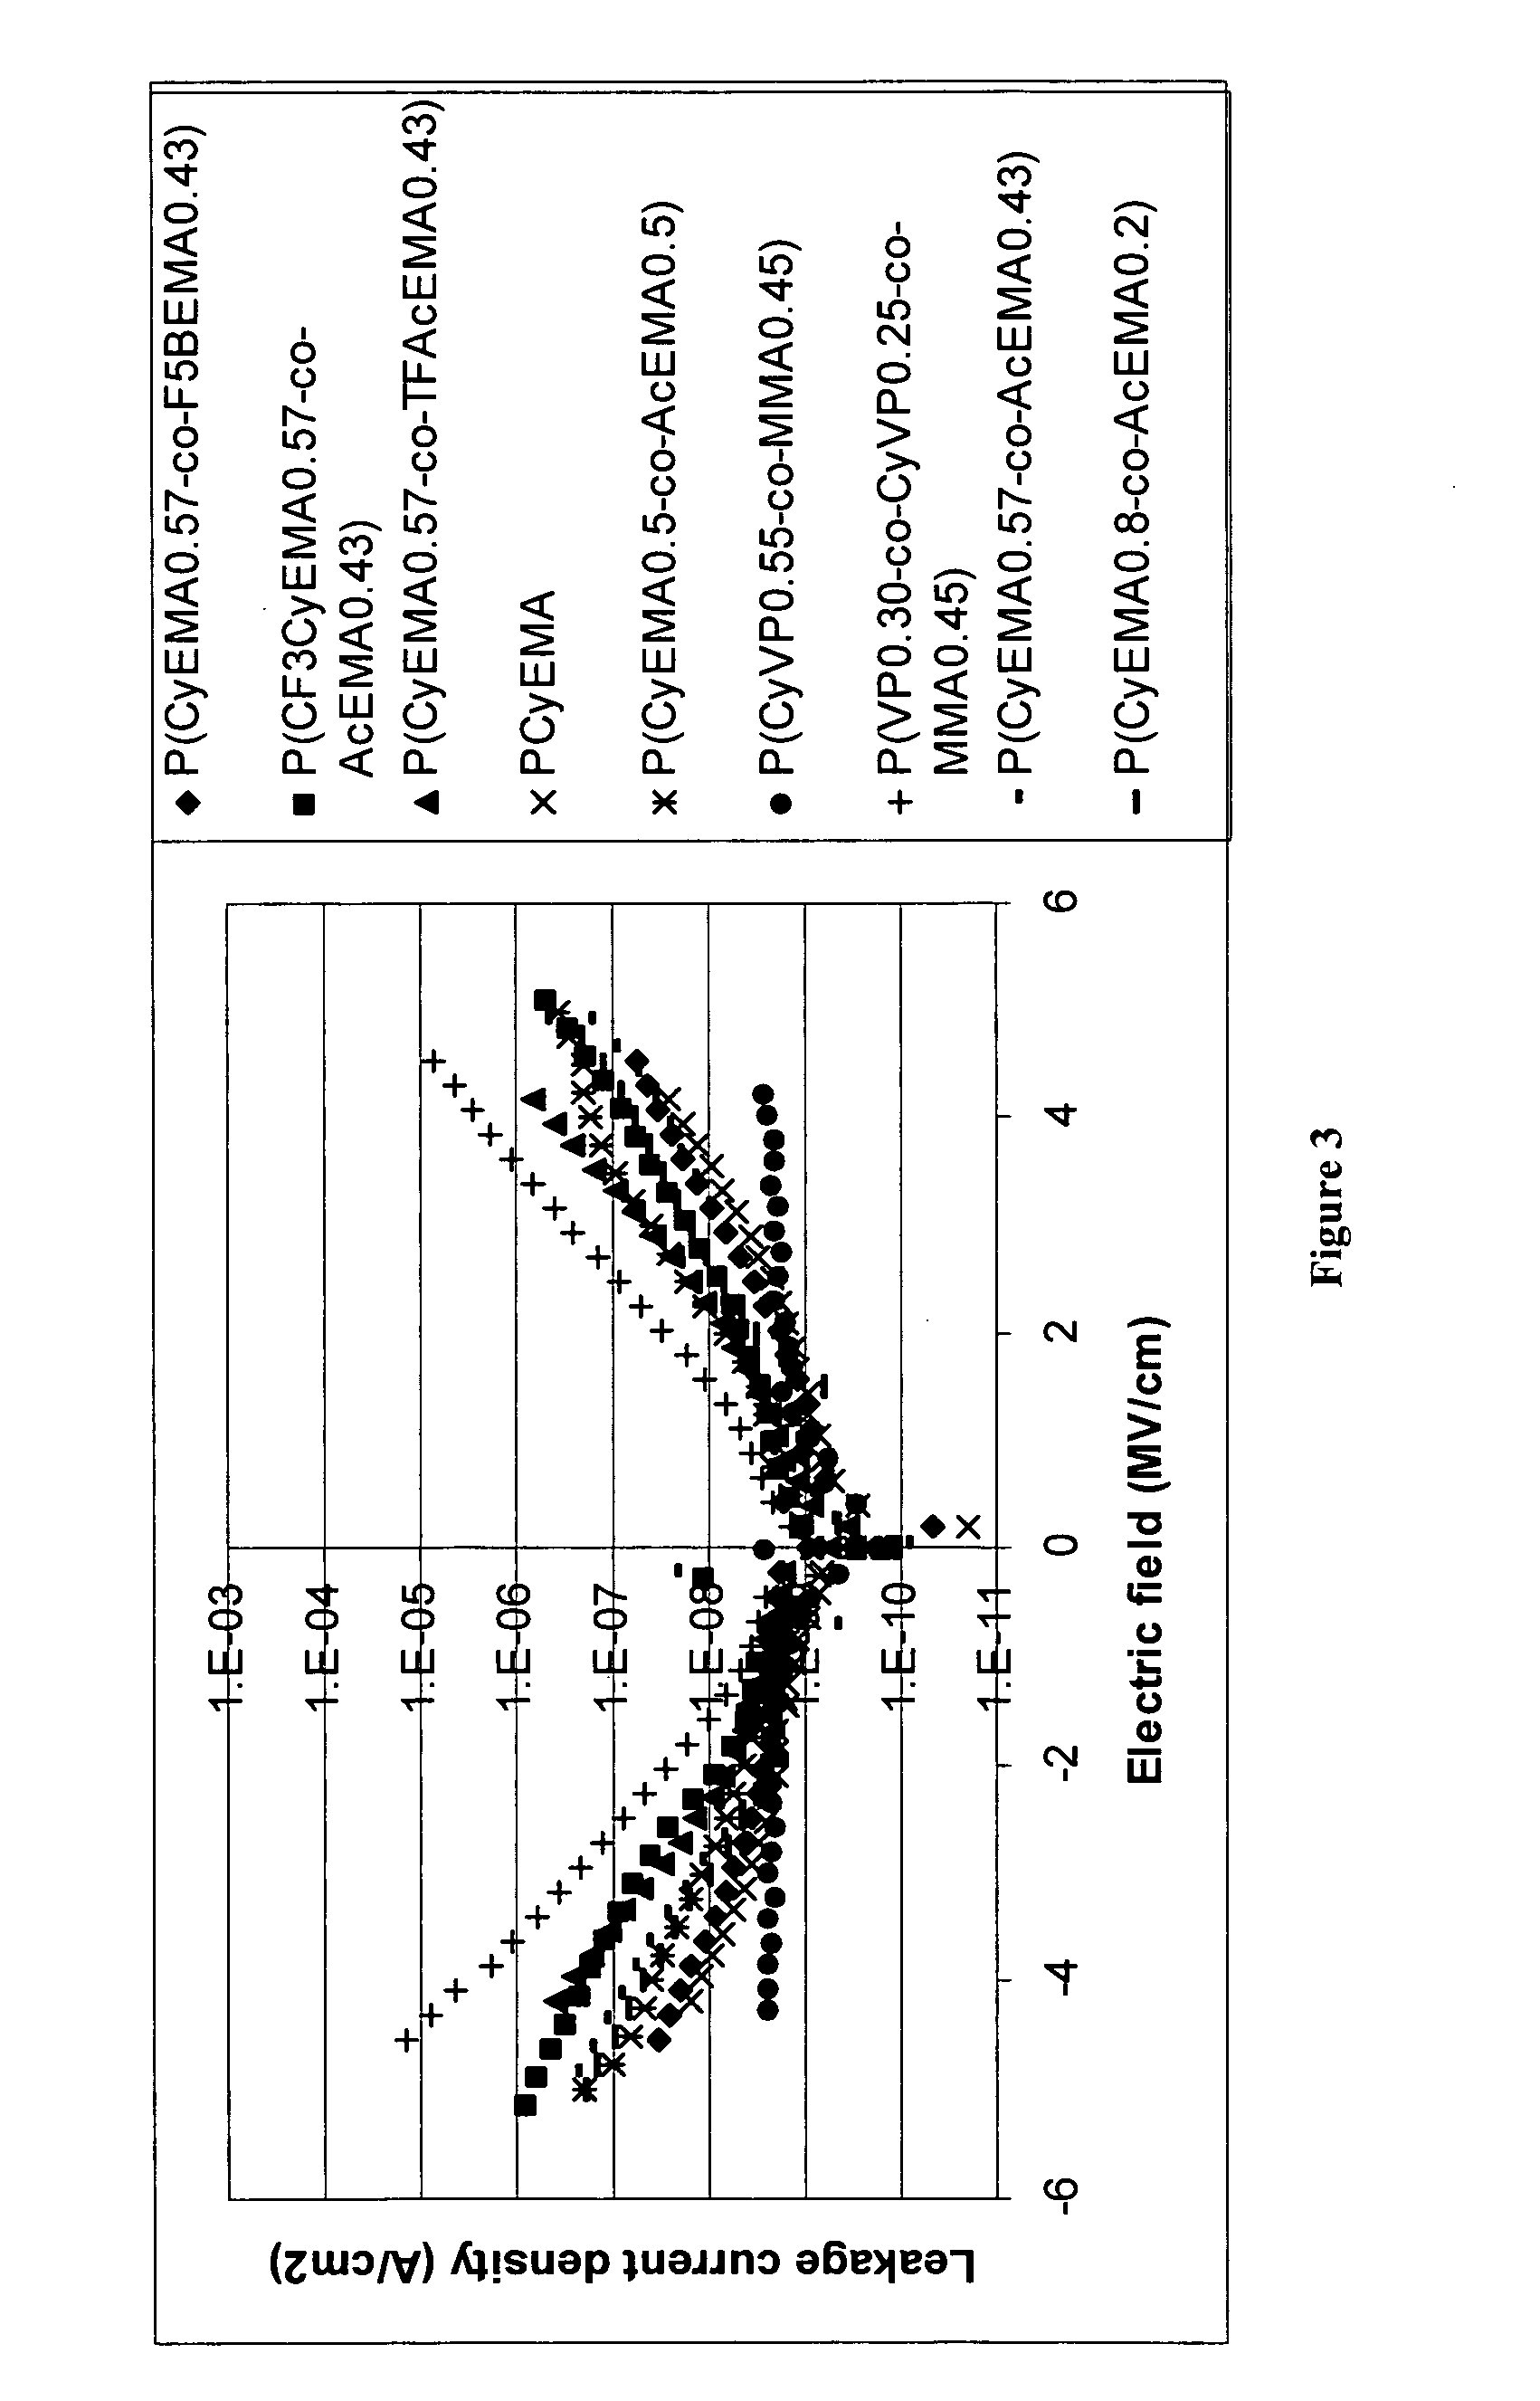 Photopolymer-based dielectric materials and methods of preparation and use thereof